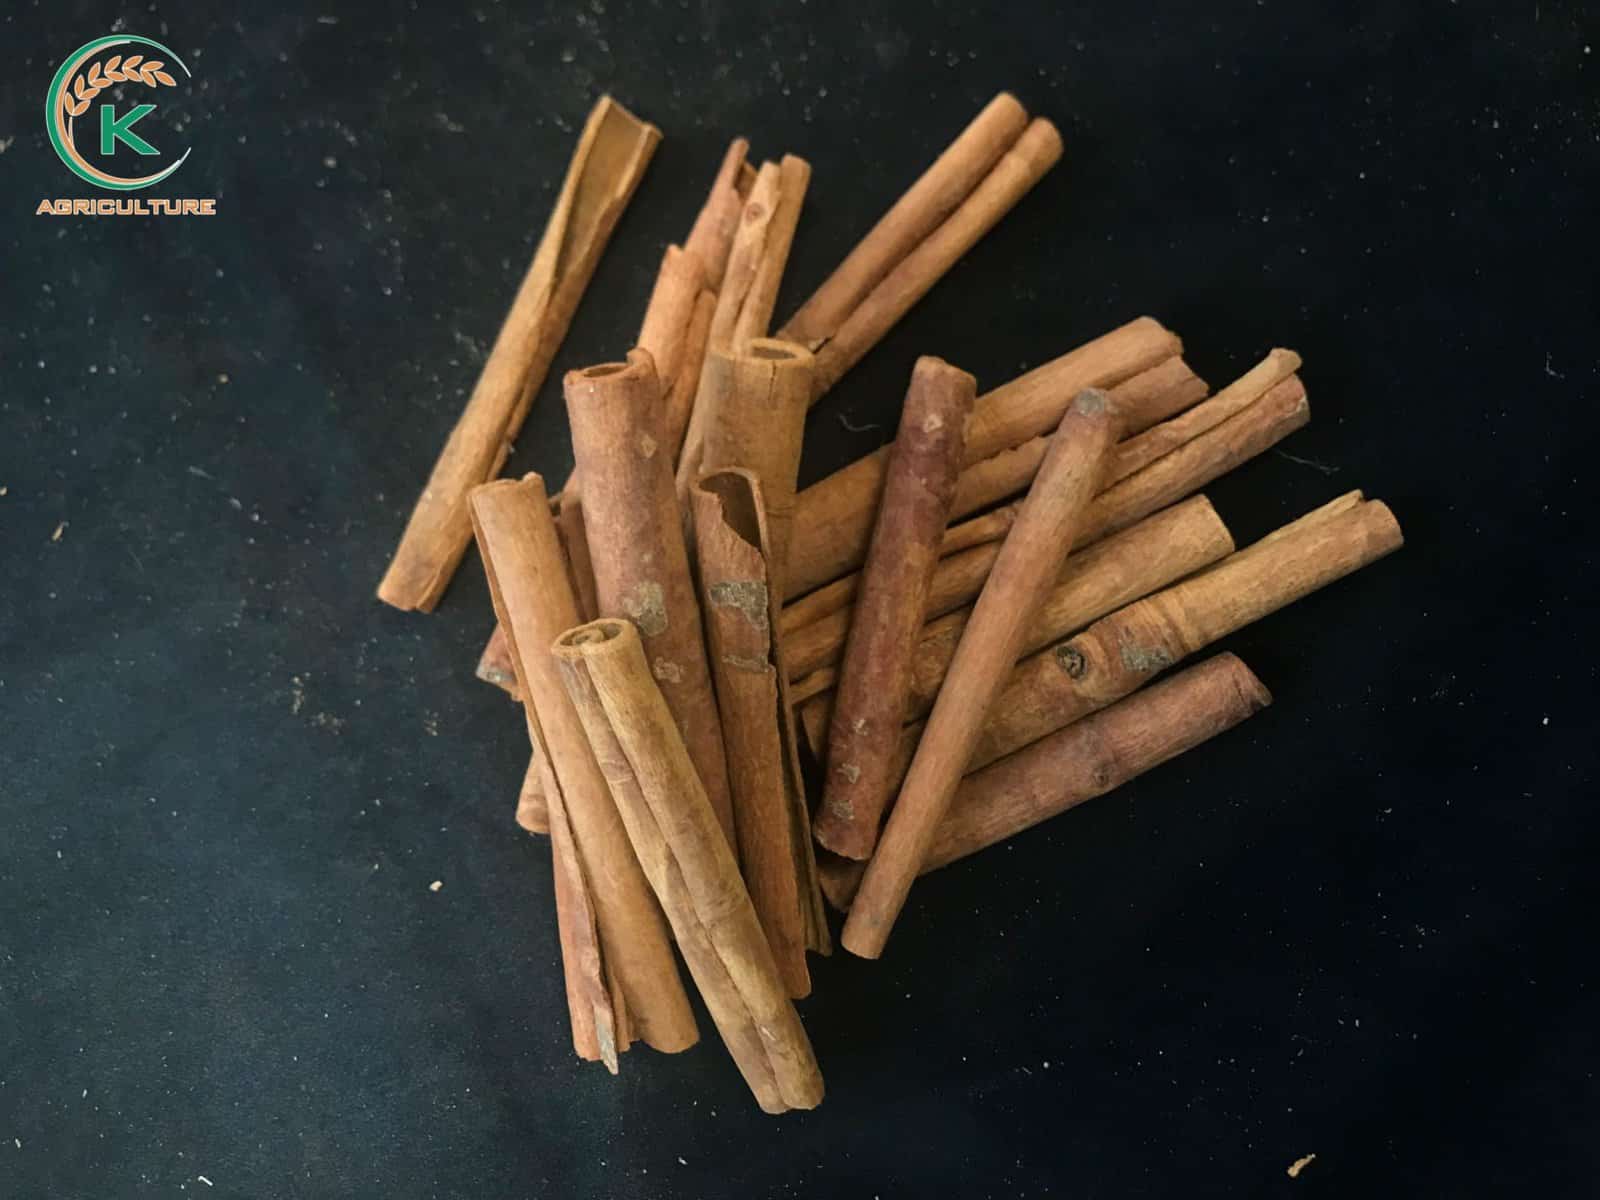 cinnamon-in-bulk-and-3-cases-of-scam-that-importers-must-avoid-2.jpg